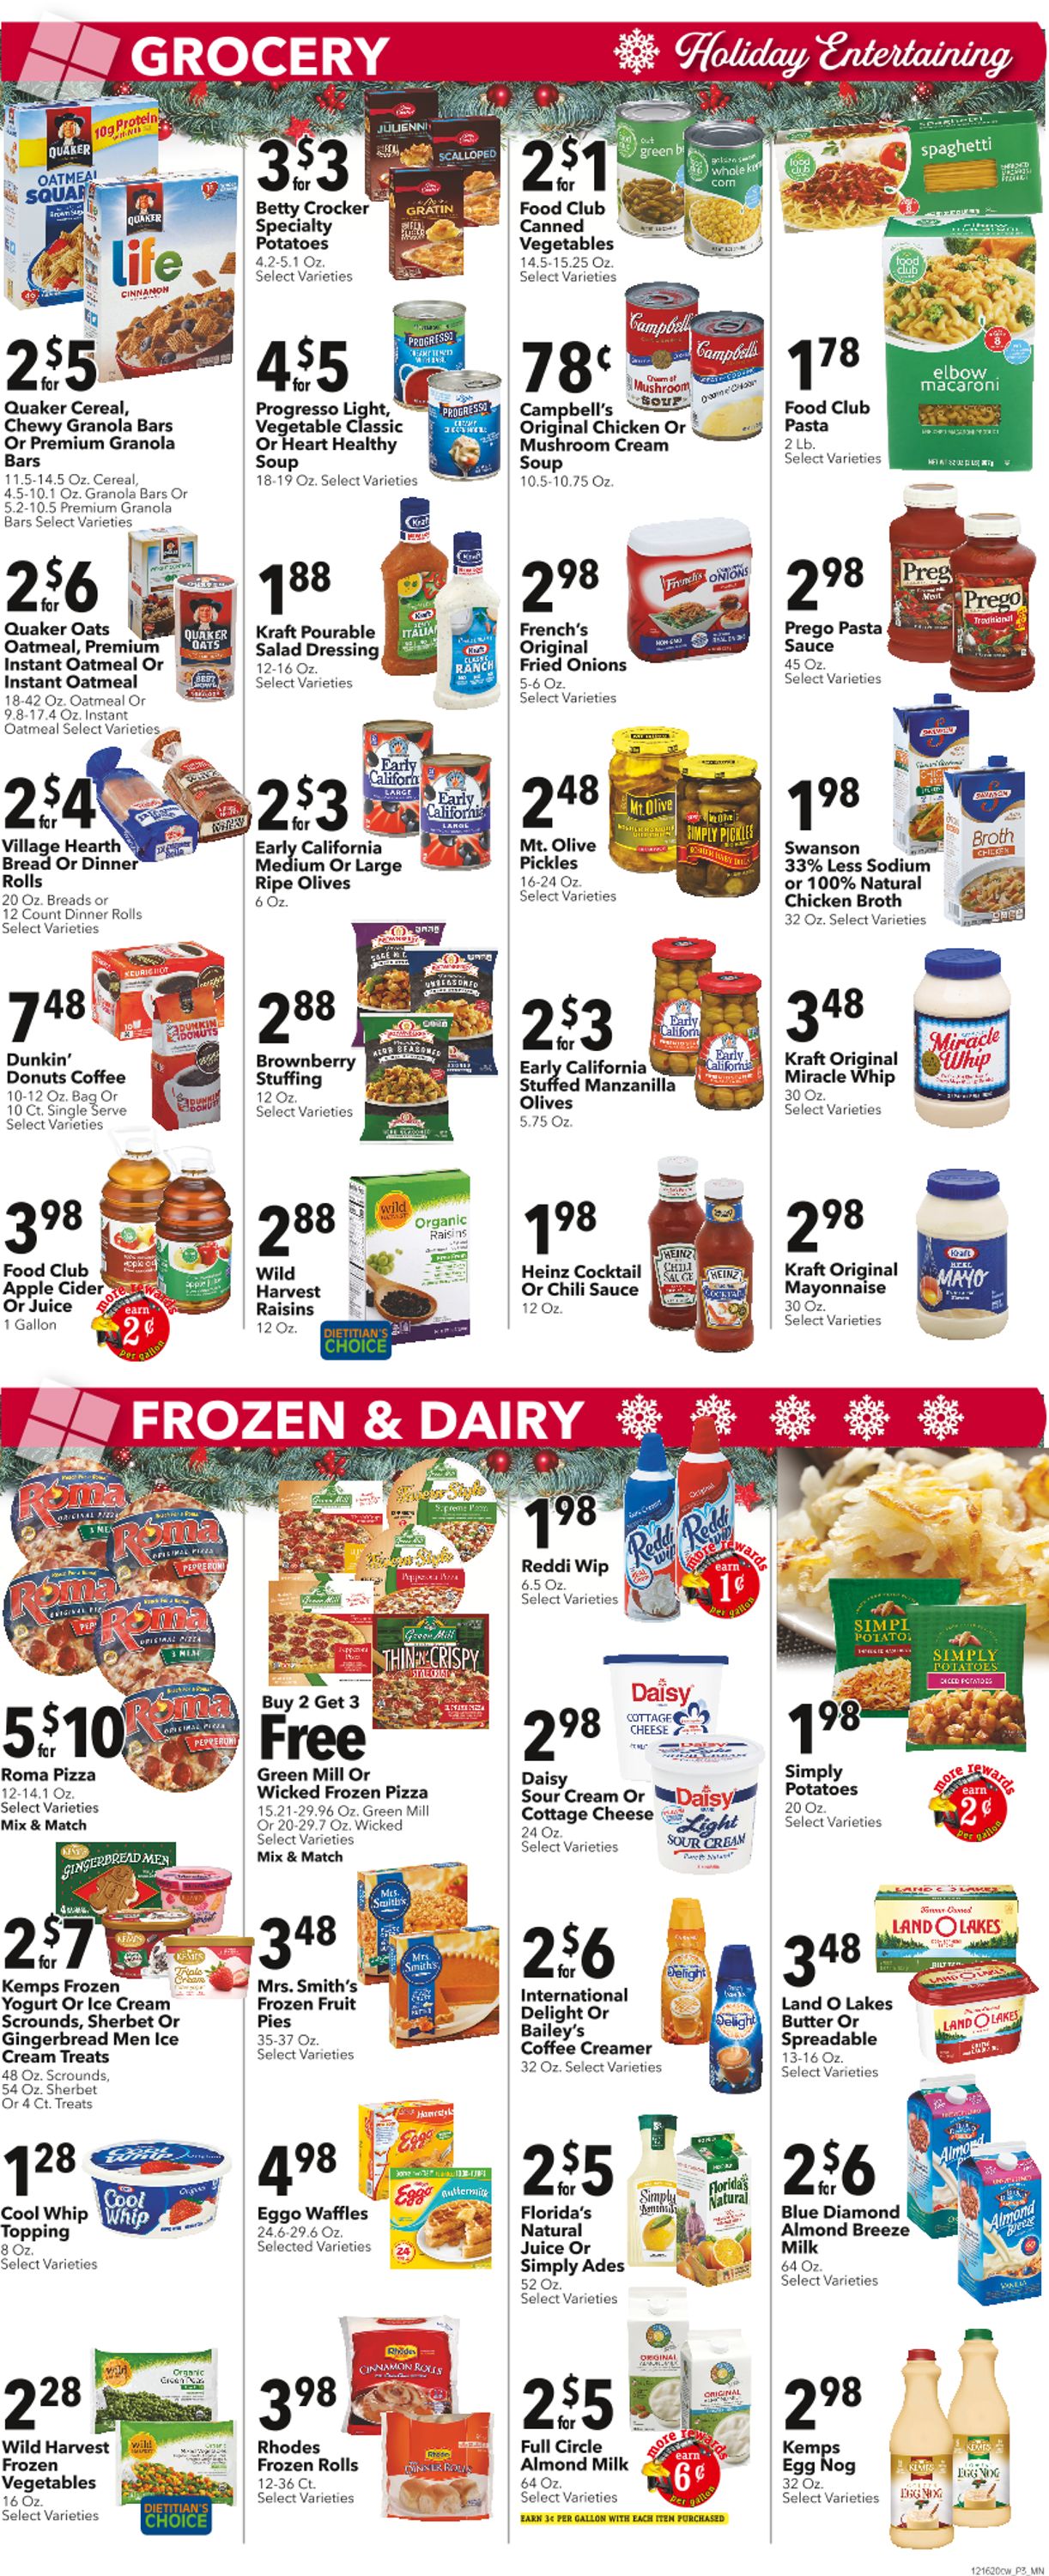 Cash Wise Weekly Ad Circular - valid 12/16-12/24/2020 (Page 3)